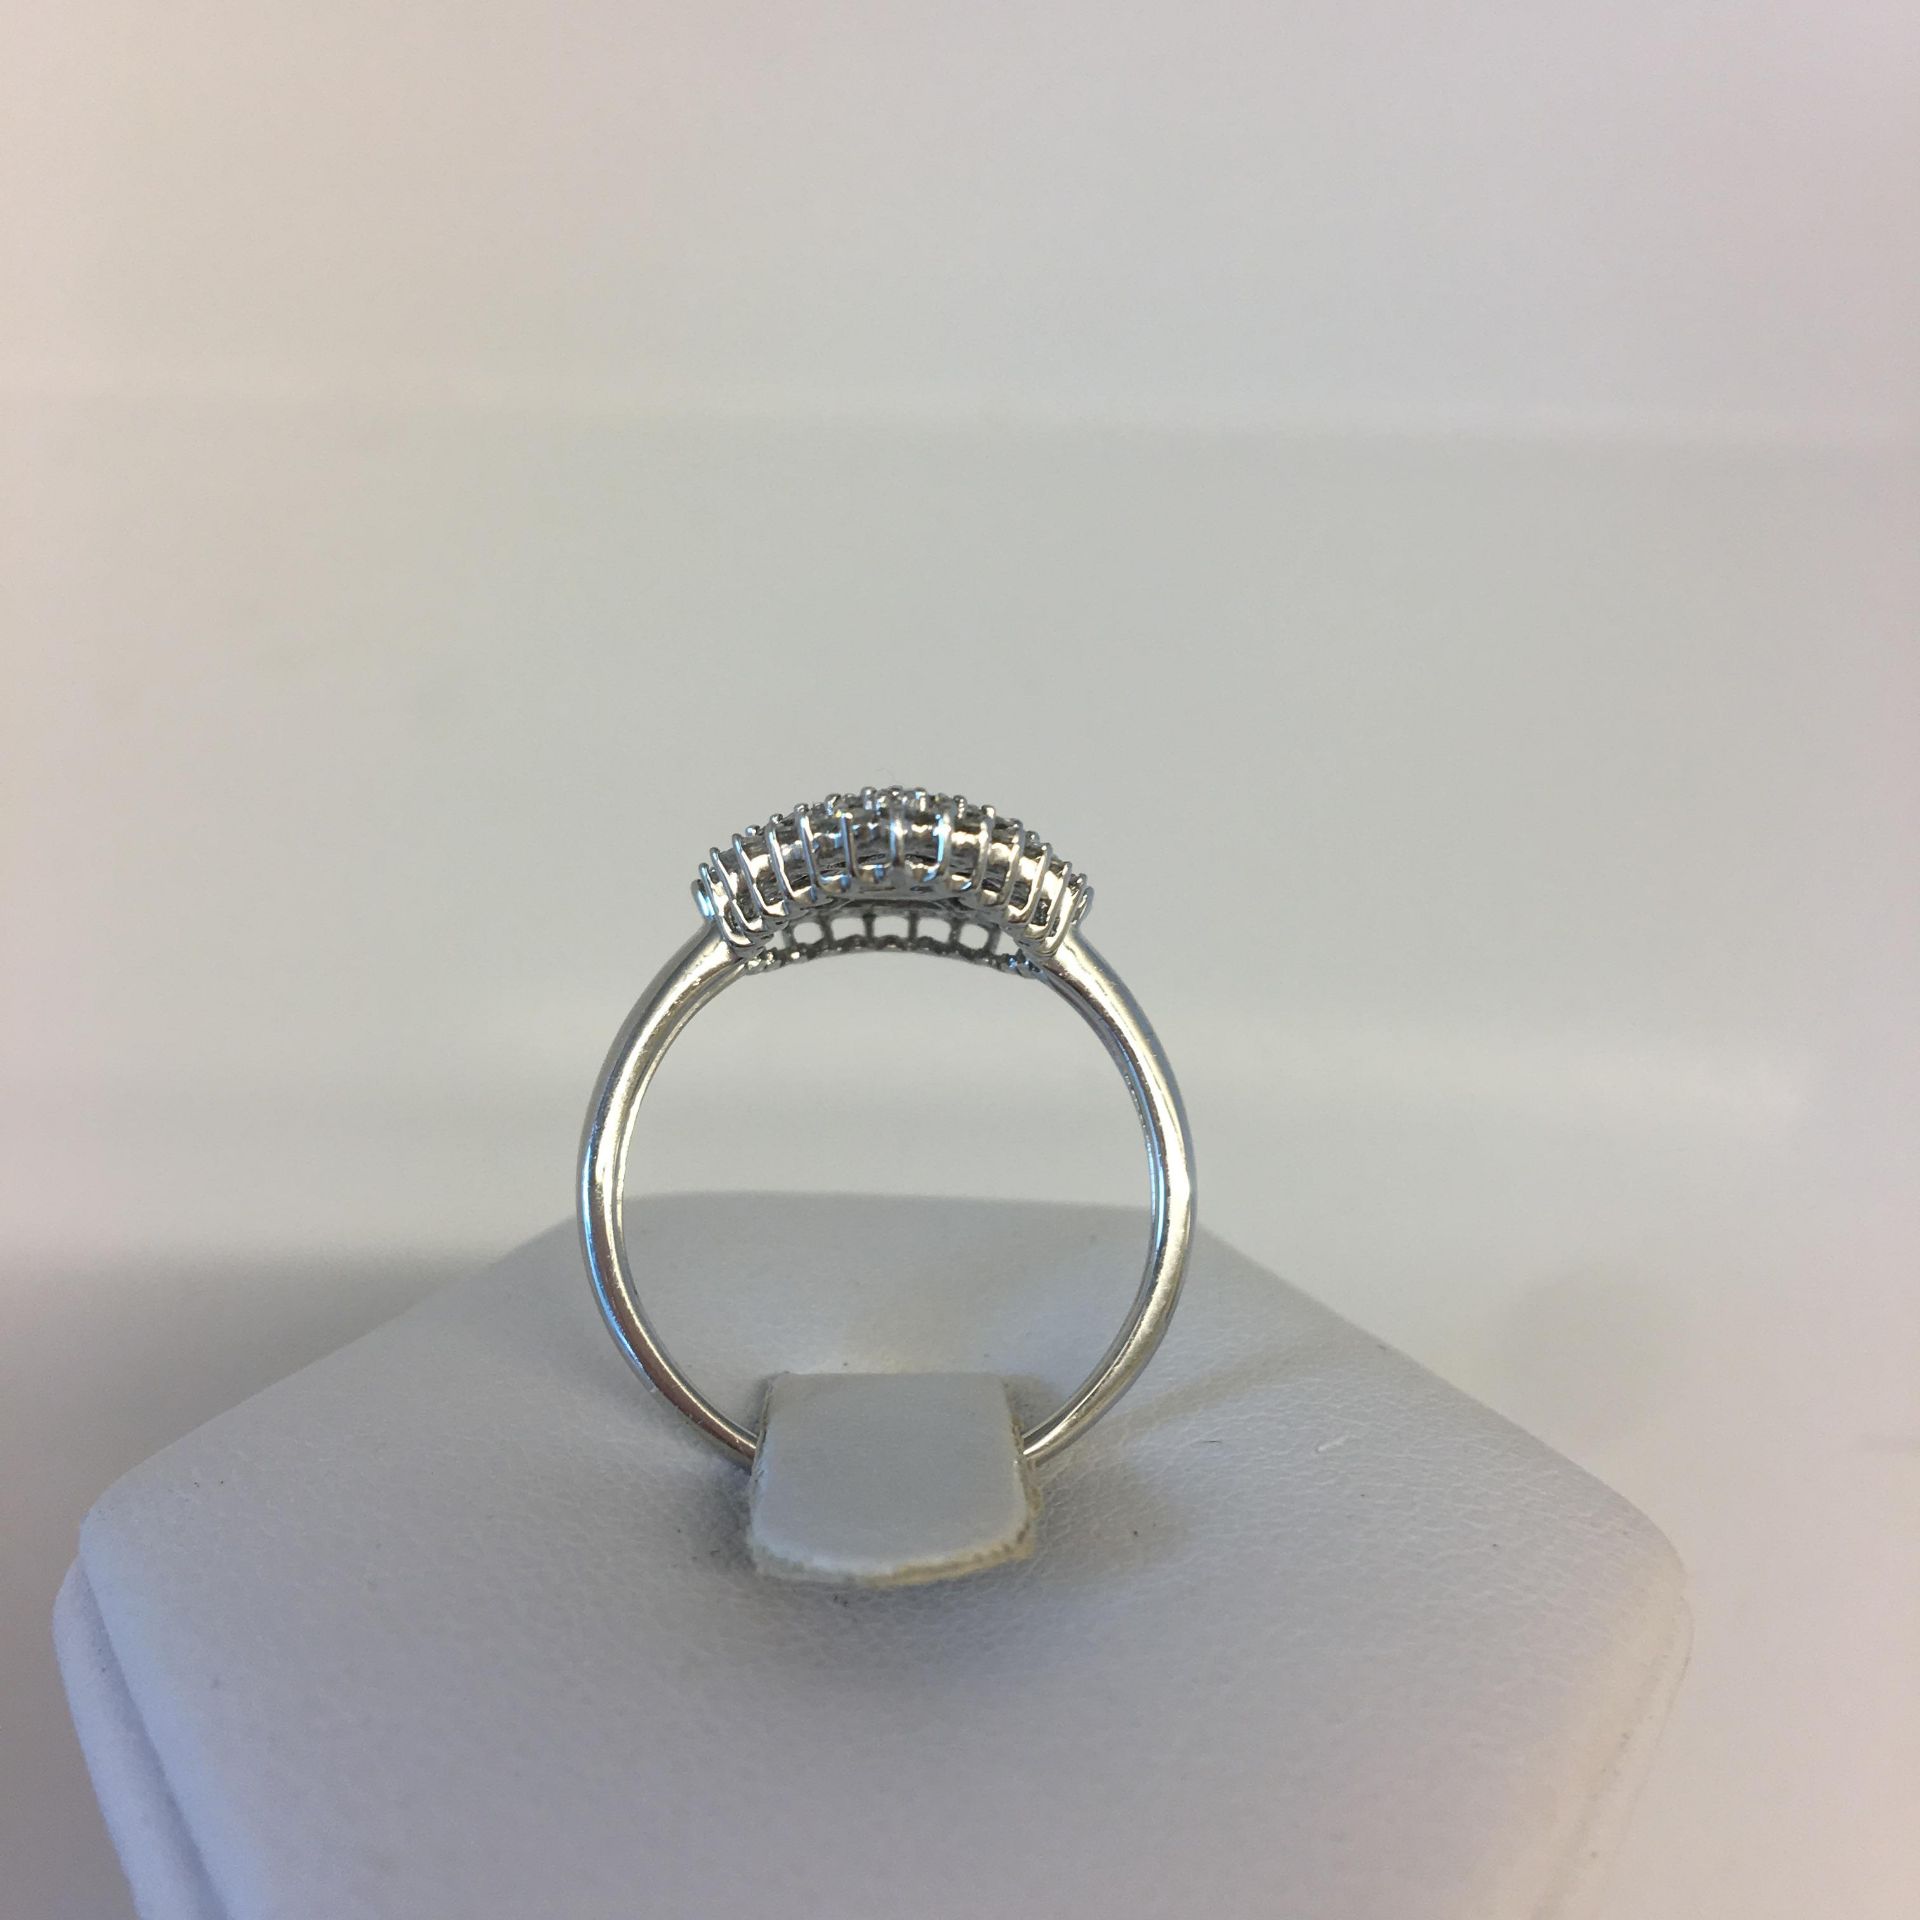 9ct White Gold 1.00ct Diamond Pear Cluster Ring - Image 3 of 4